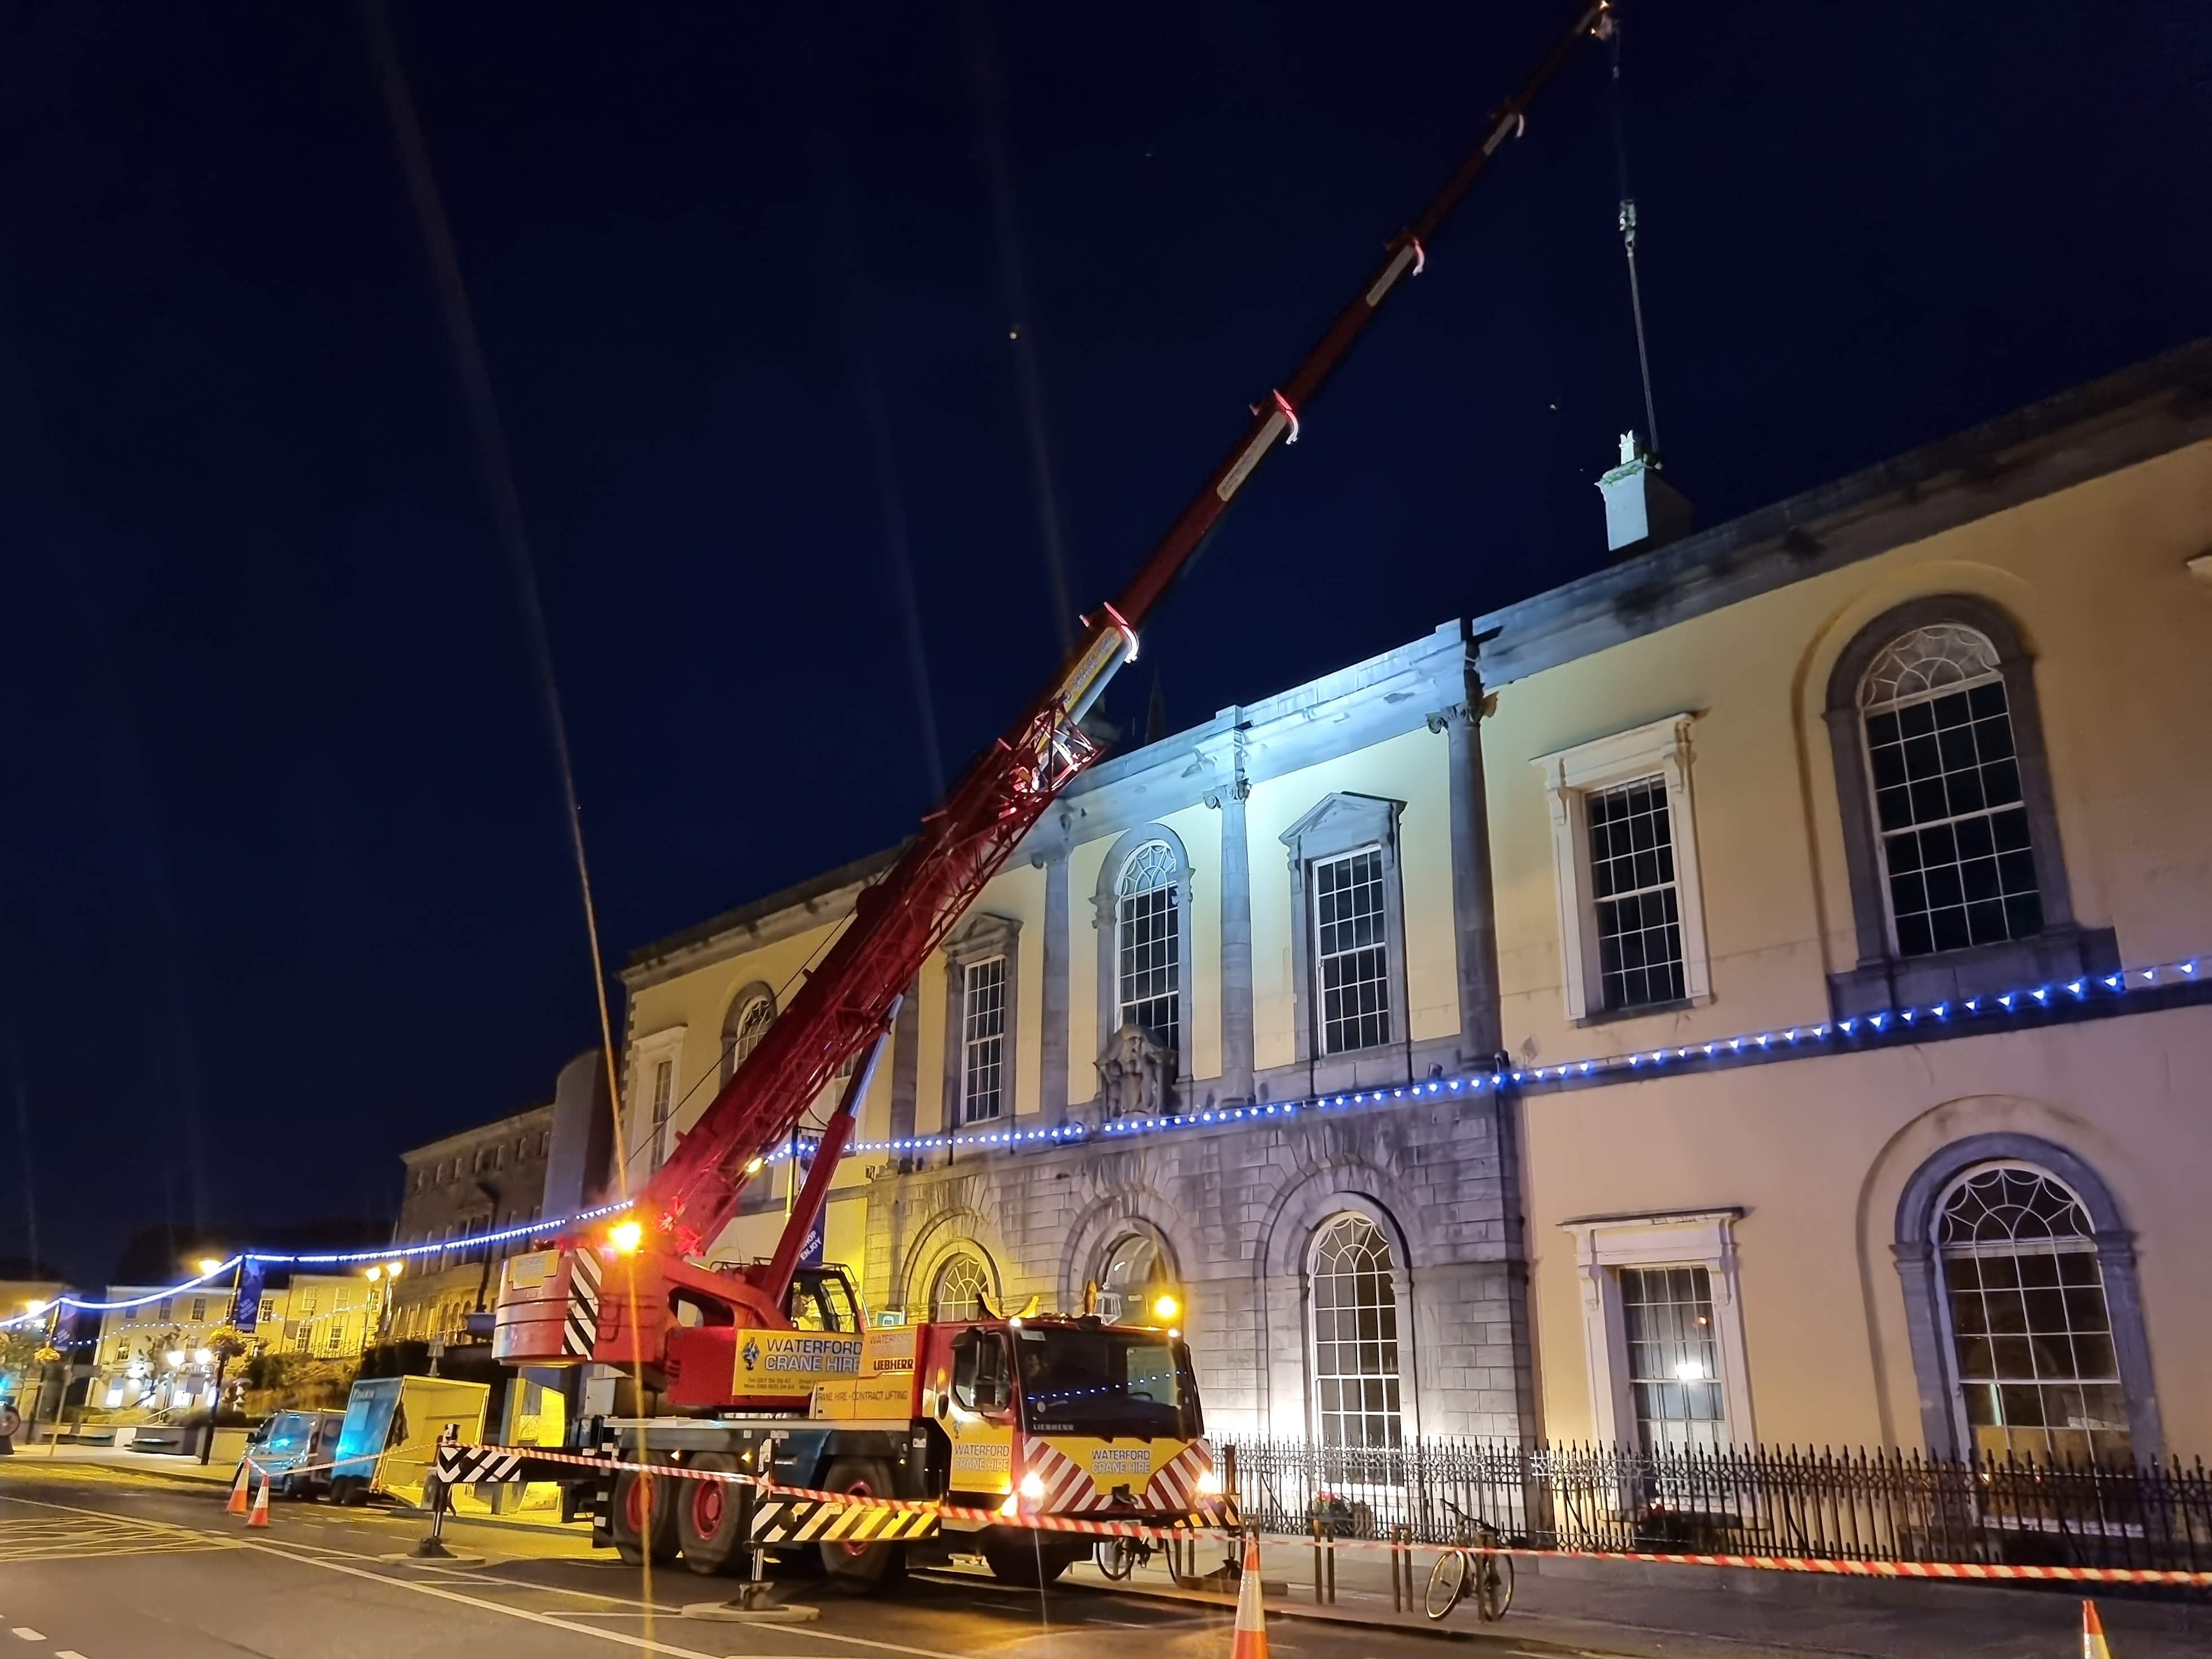 Installing AHU's to roof of Waterford City Hall